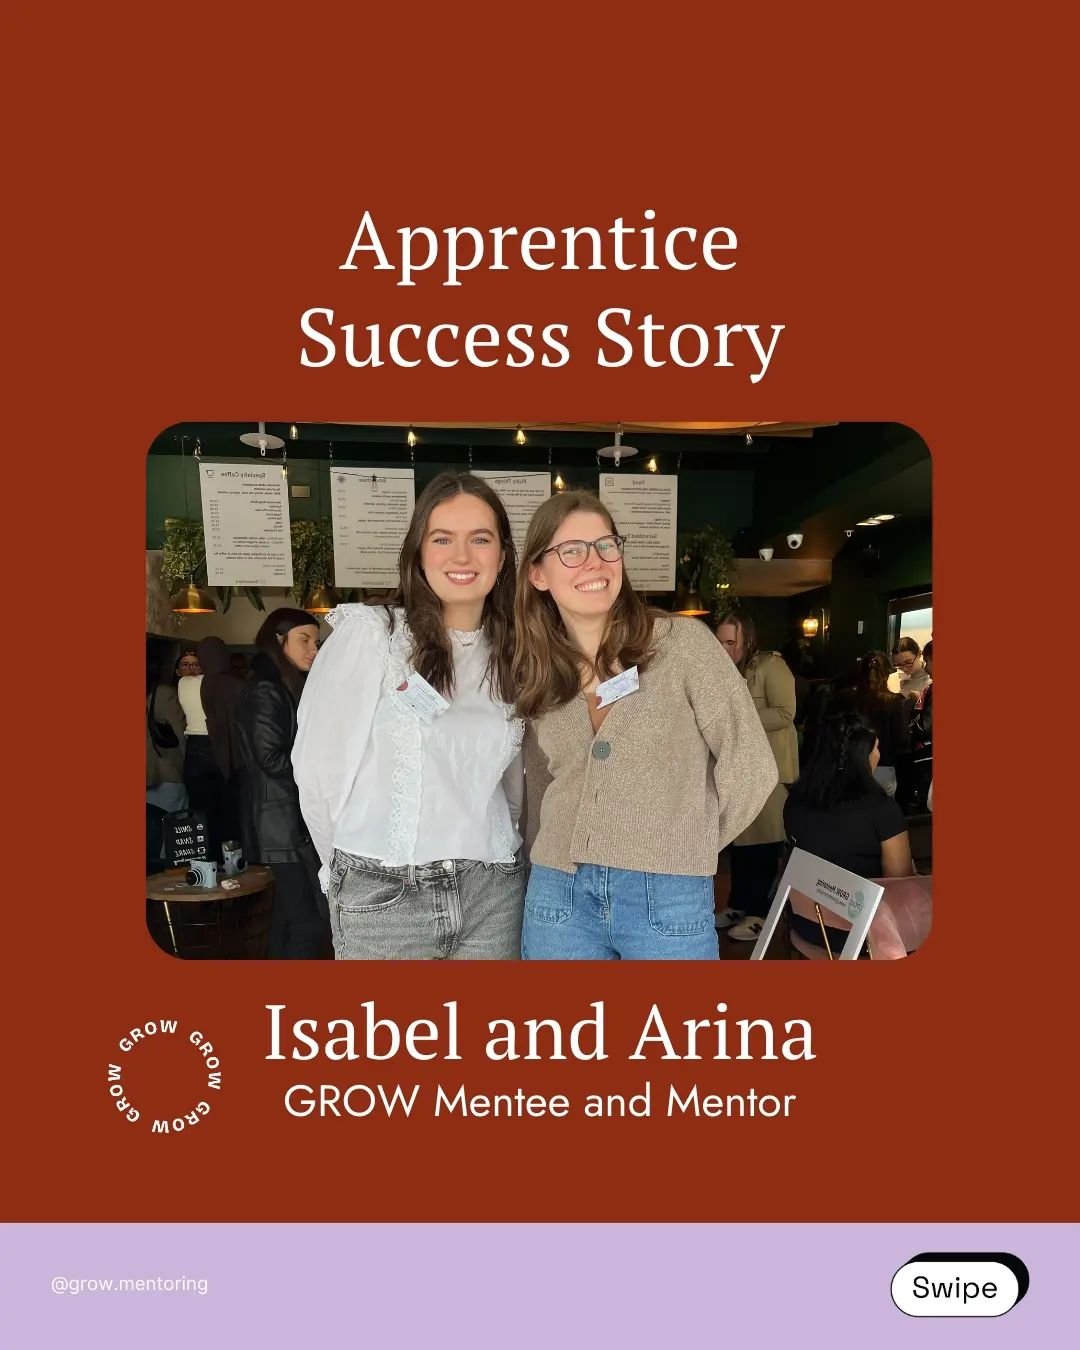 Success Story | Celebrating a Mentoring Relationship 🎉

We are excited to hear that Isabel secured a solicitor apprenticeship position with Linklaters! Her story is one of resilience, as with the help of her mentor Arina, she got through setbacks an